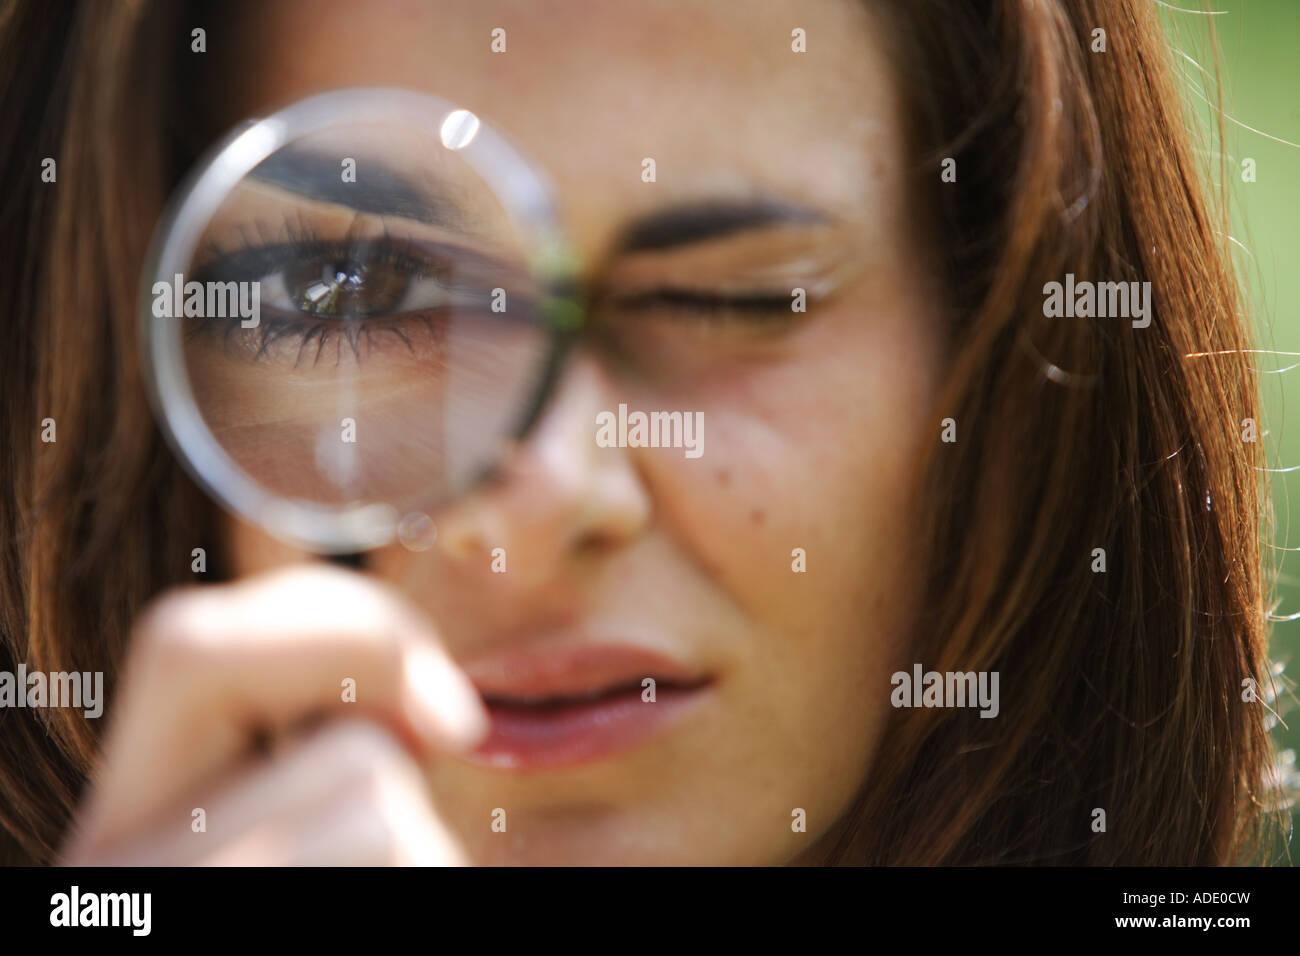 Young woman looks  through a magnifying glass with one eye © Peter Schatz/Alamy Stock Photo